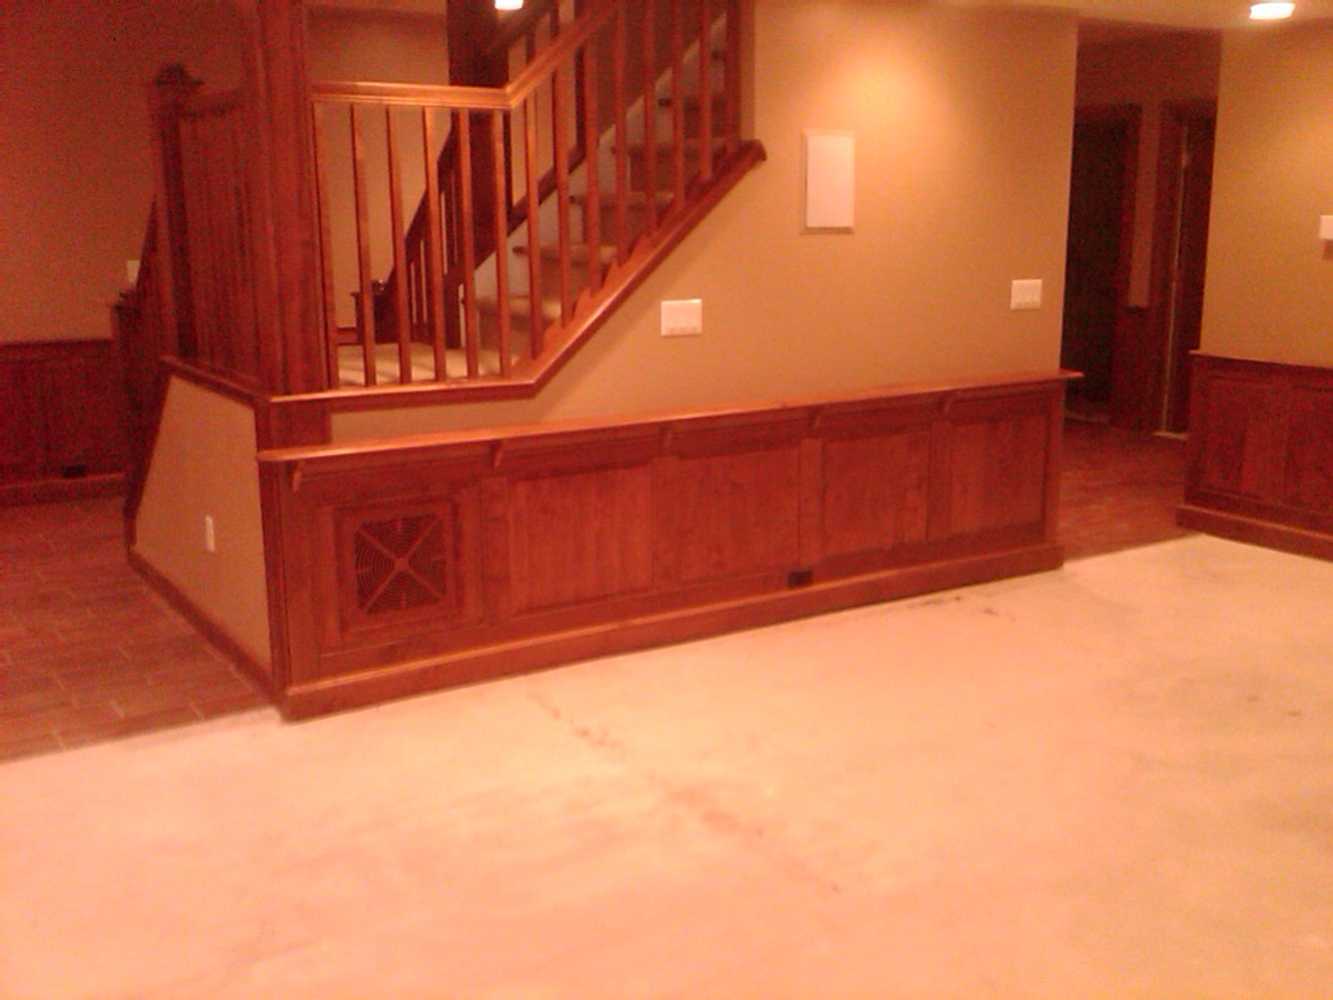 Finished basement remediation and re-build-(restoration project)